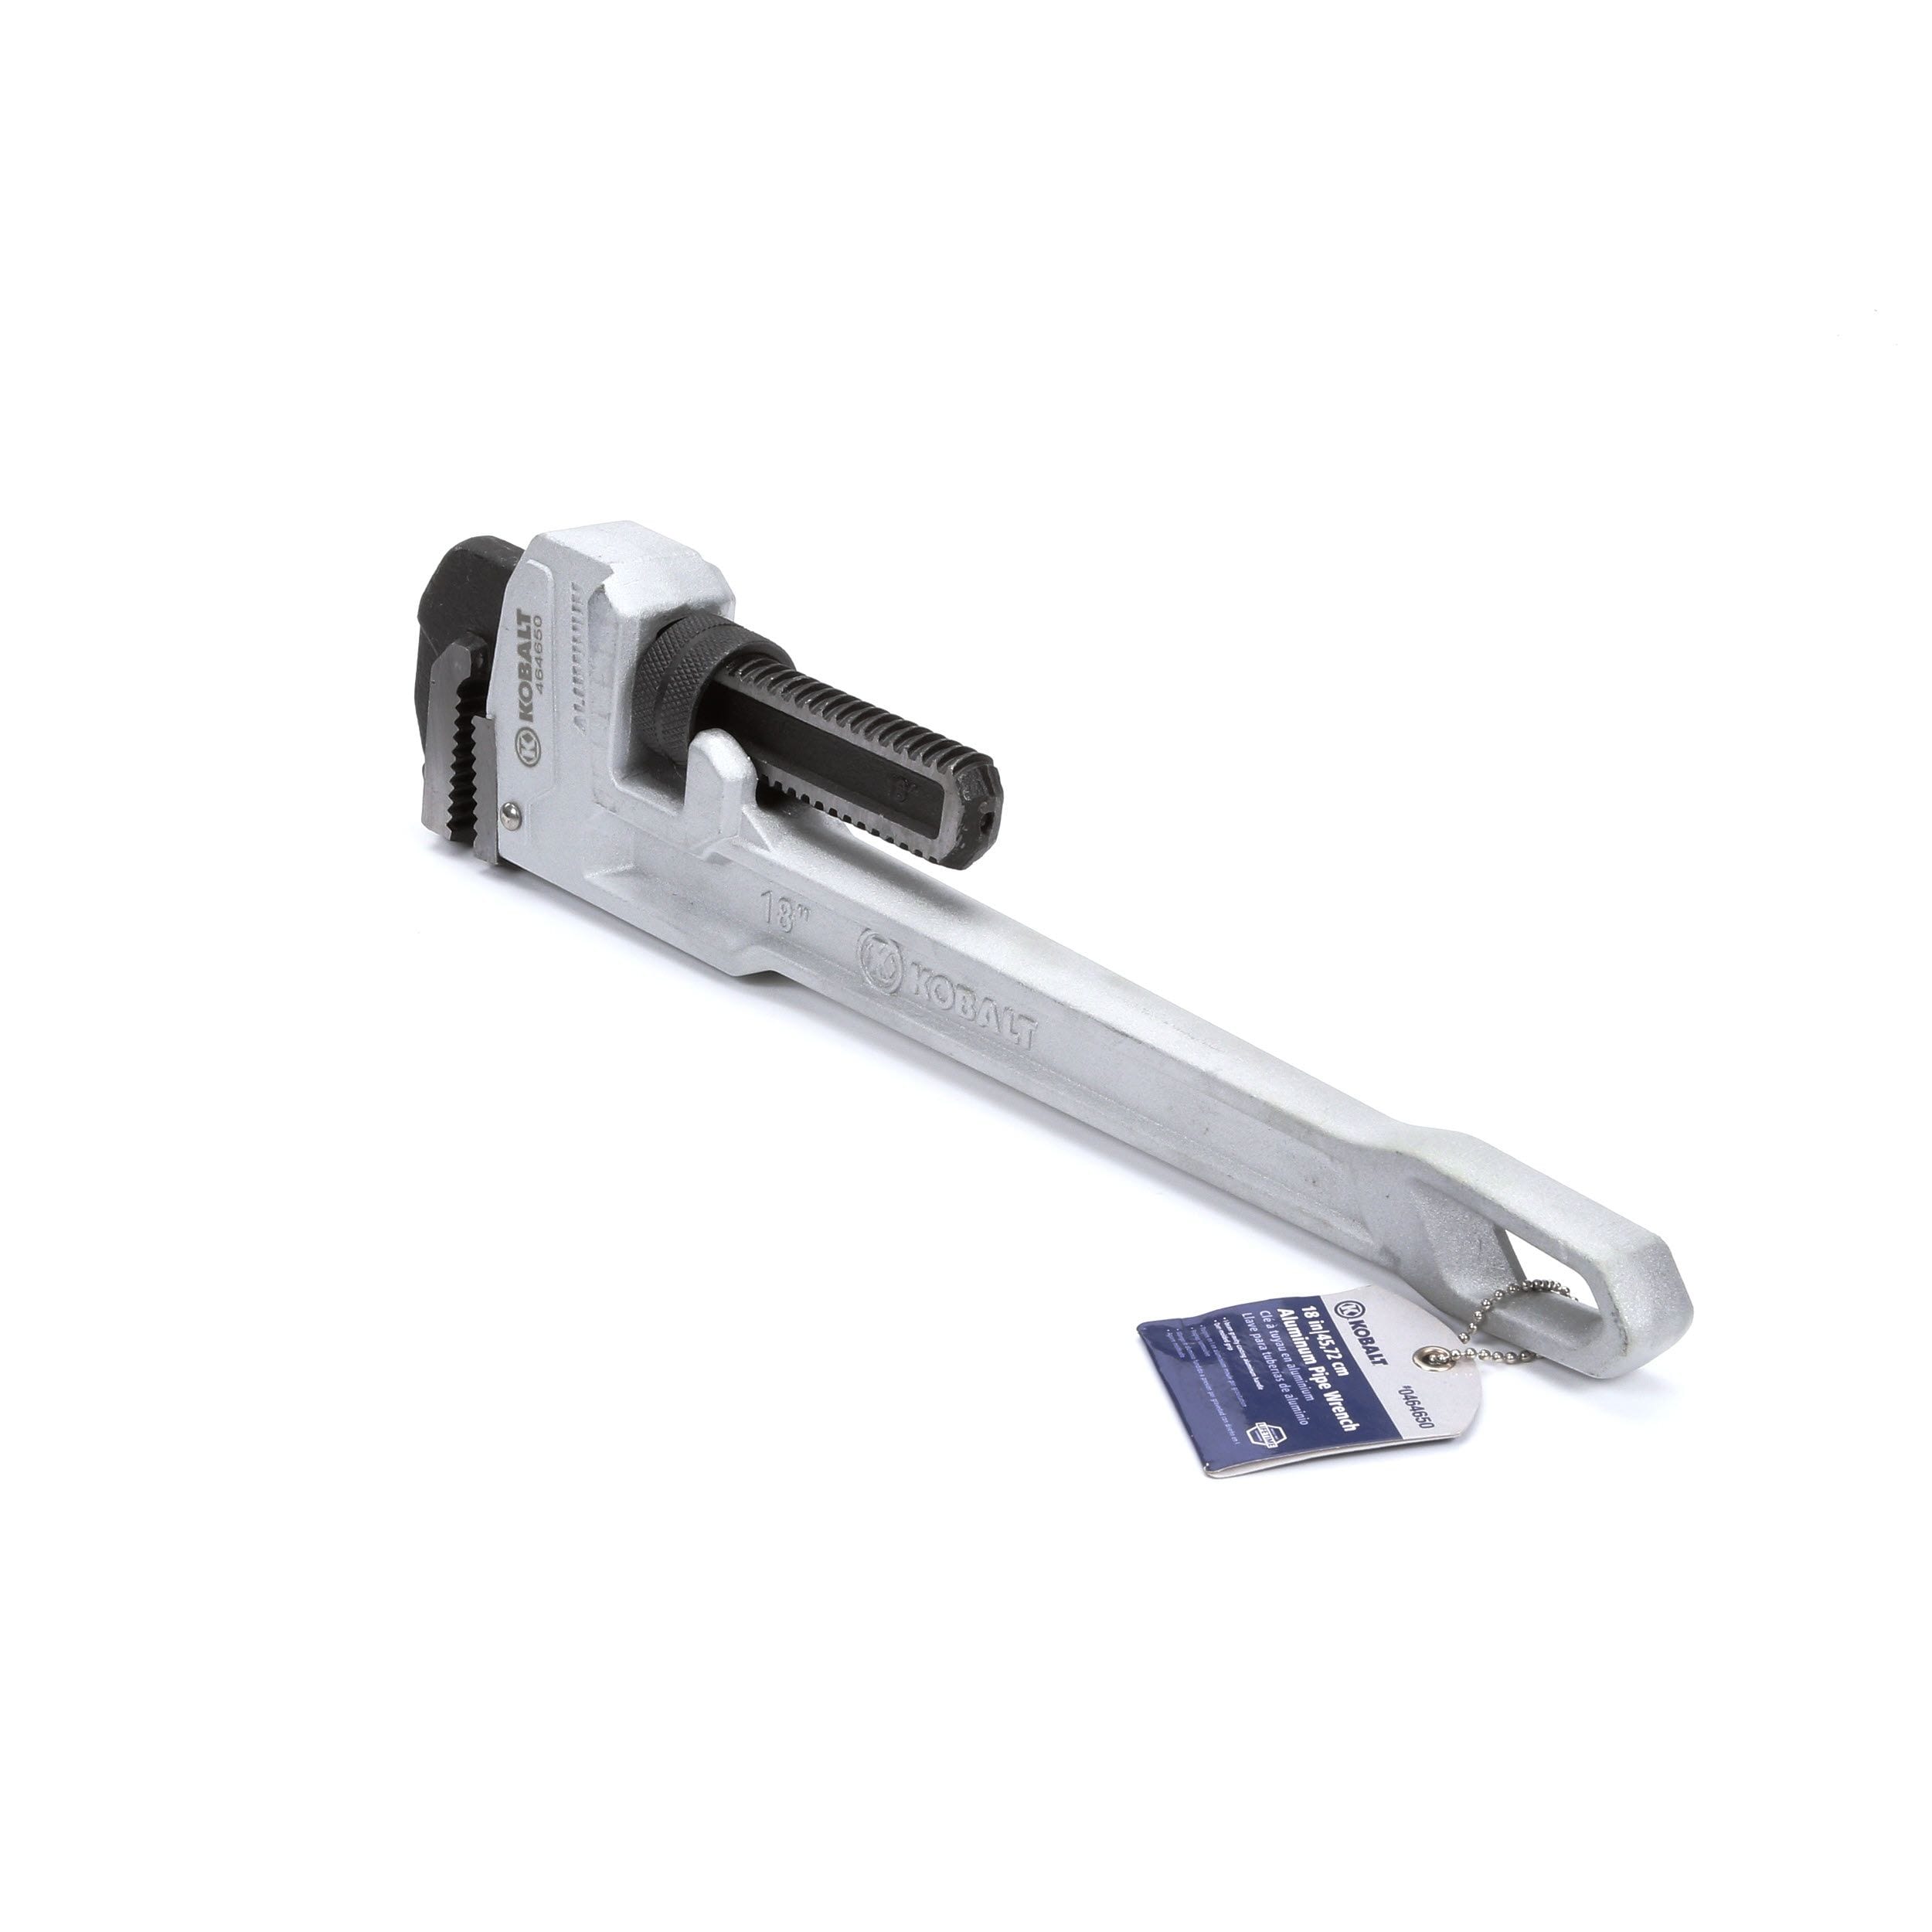 Aluminum Pipe Wrenches at Lowes.com